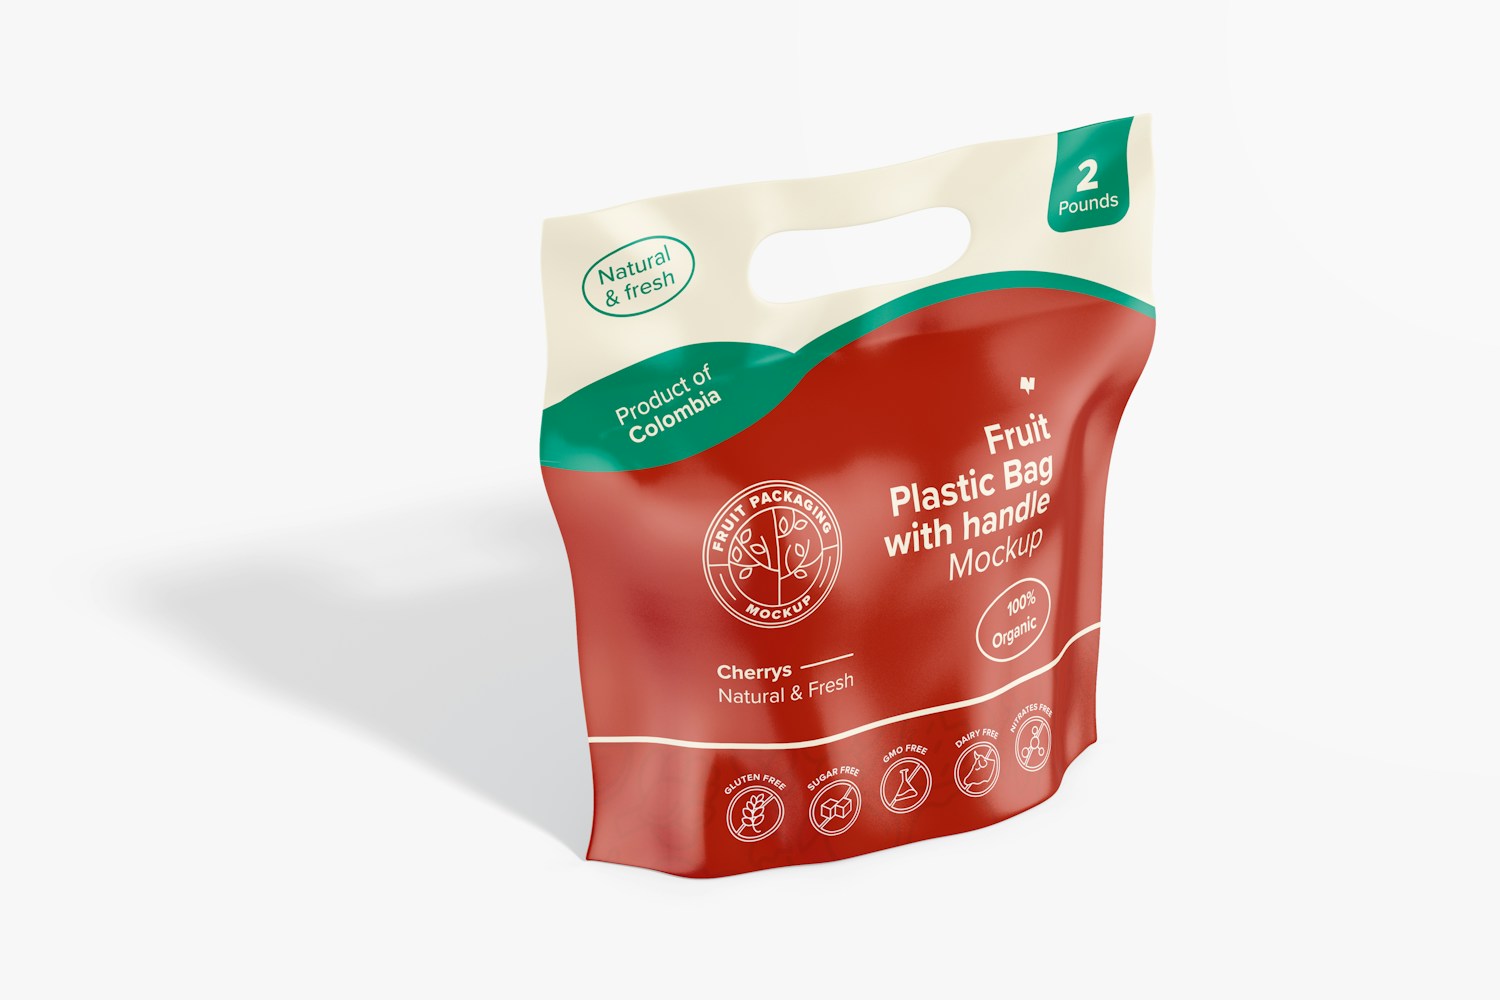 Fruit Plastic Bag with Handle Mockup, Perspective